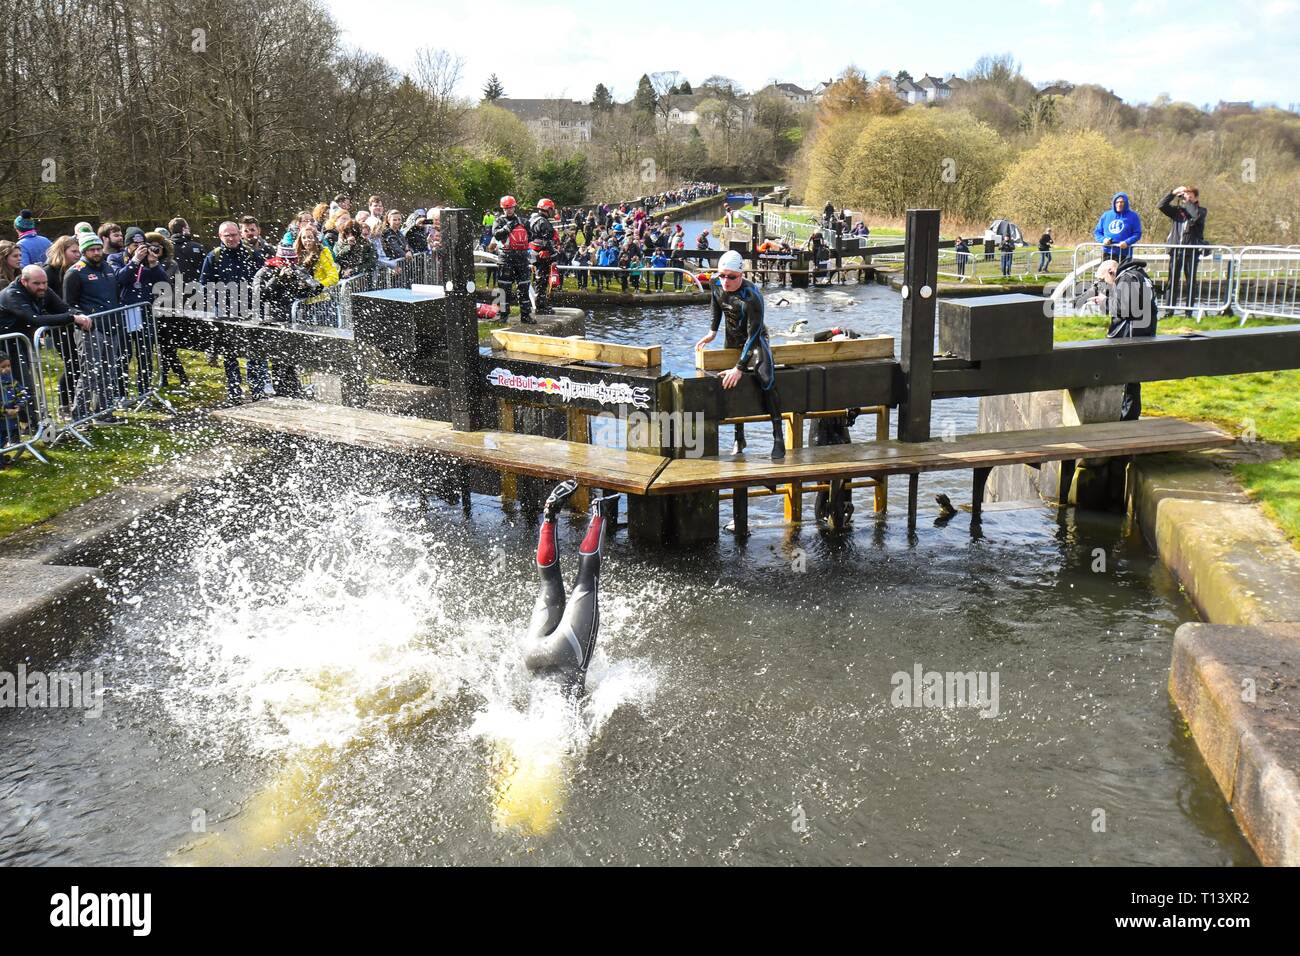 Maryhill, Glasgow, Scotland, UK. 23rd Mar, 2019. uk weather - determined competitors braving 8 degree water temperatures at the Red Bull Neptune Steps swim/climb adventure race at Maryhill Locks, Glasgow. The annual extreme event involves swimming 400 m of cold water and climbing 18 metres over 7 canal lock gates Credit: Kay Roxby/Alamy Live News Stock Photo